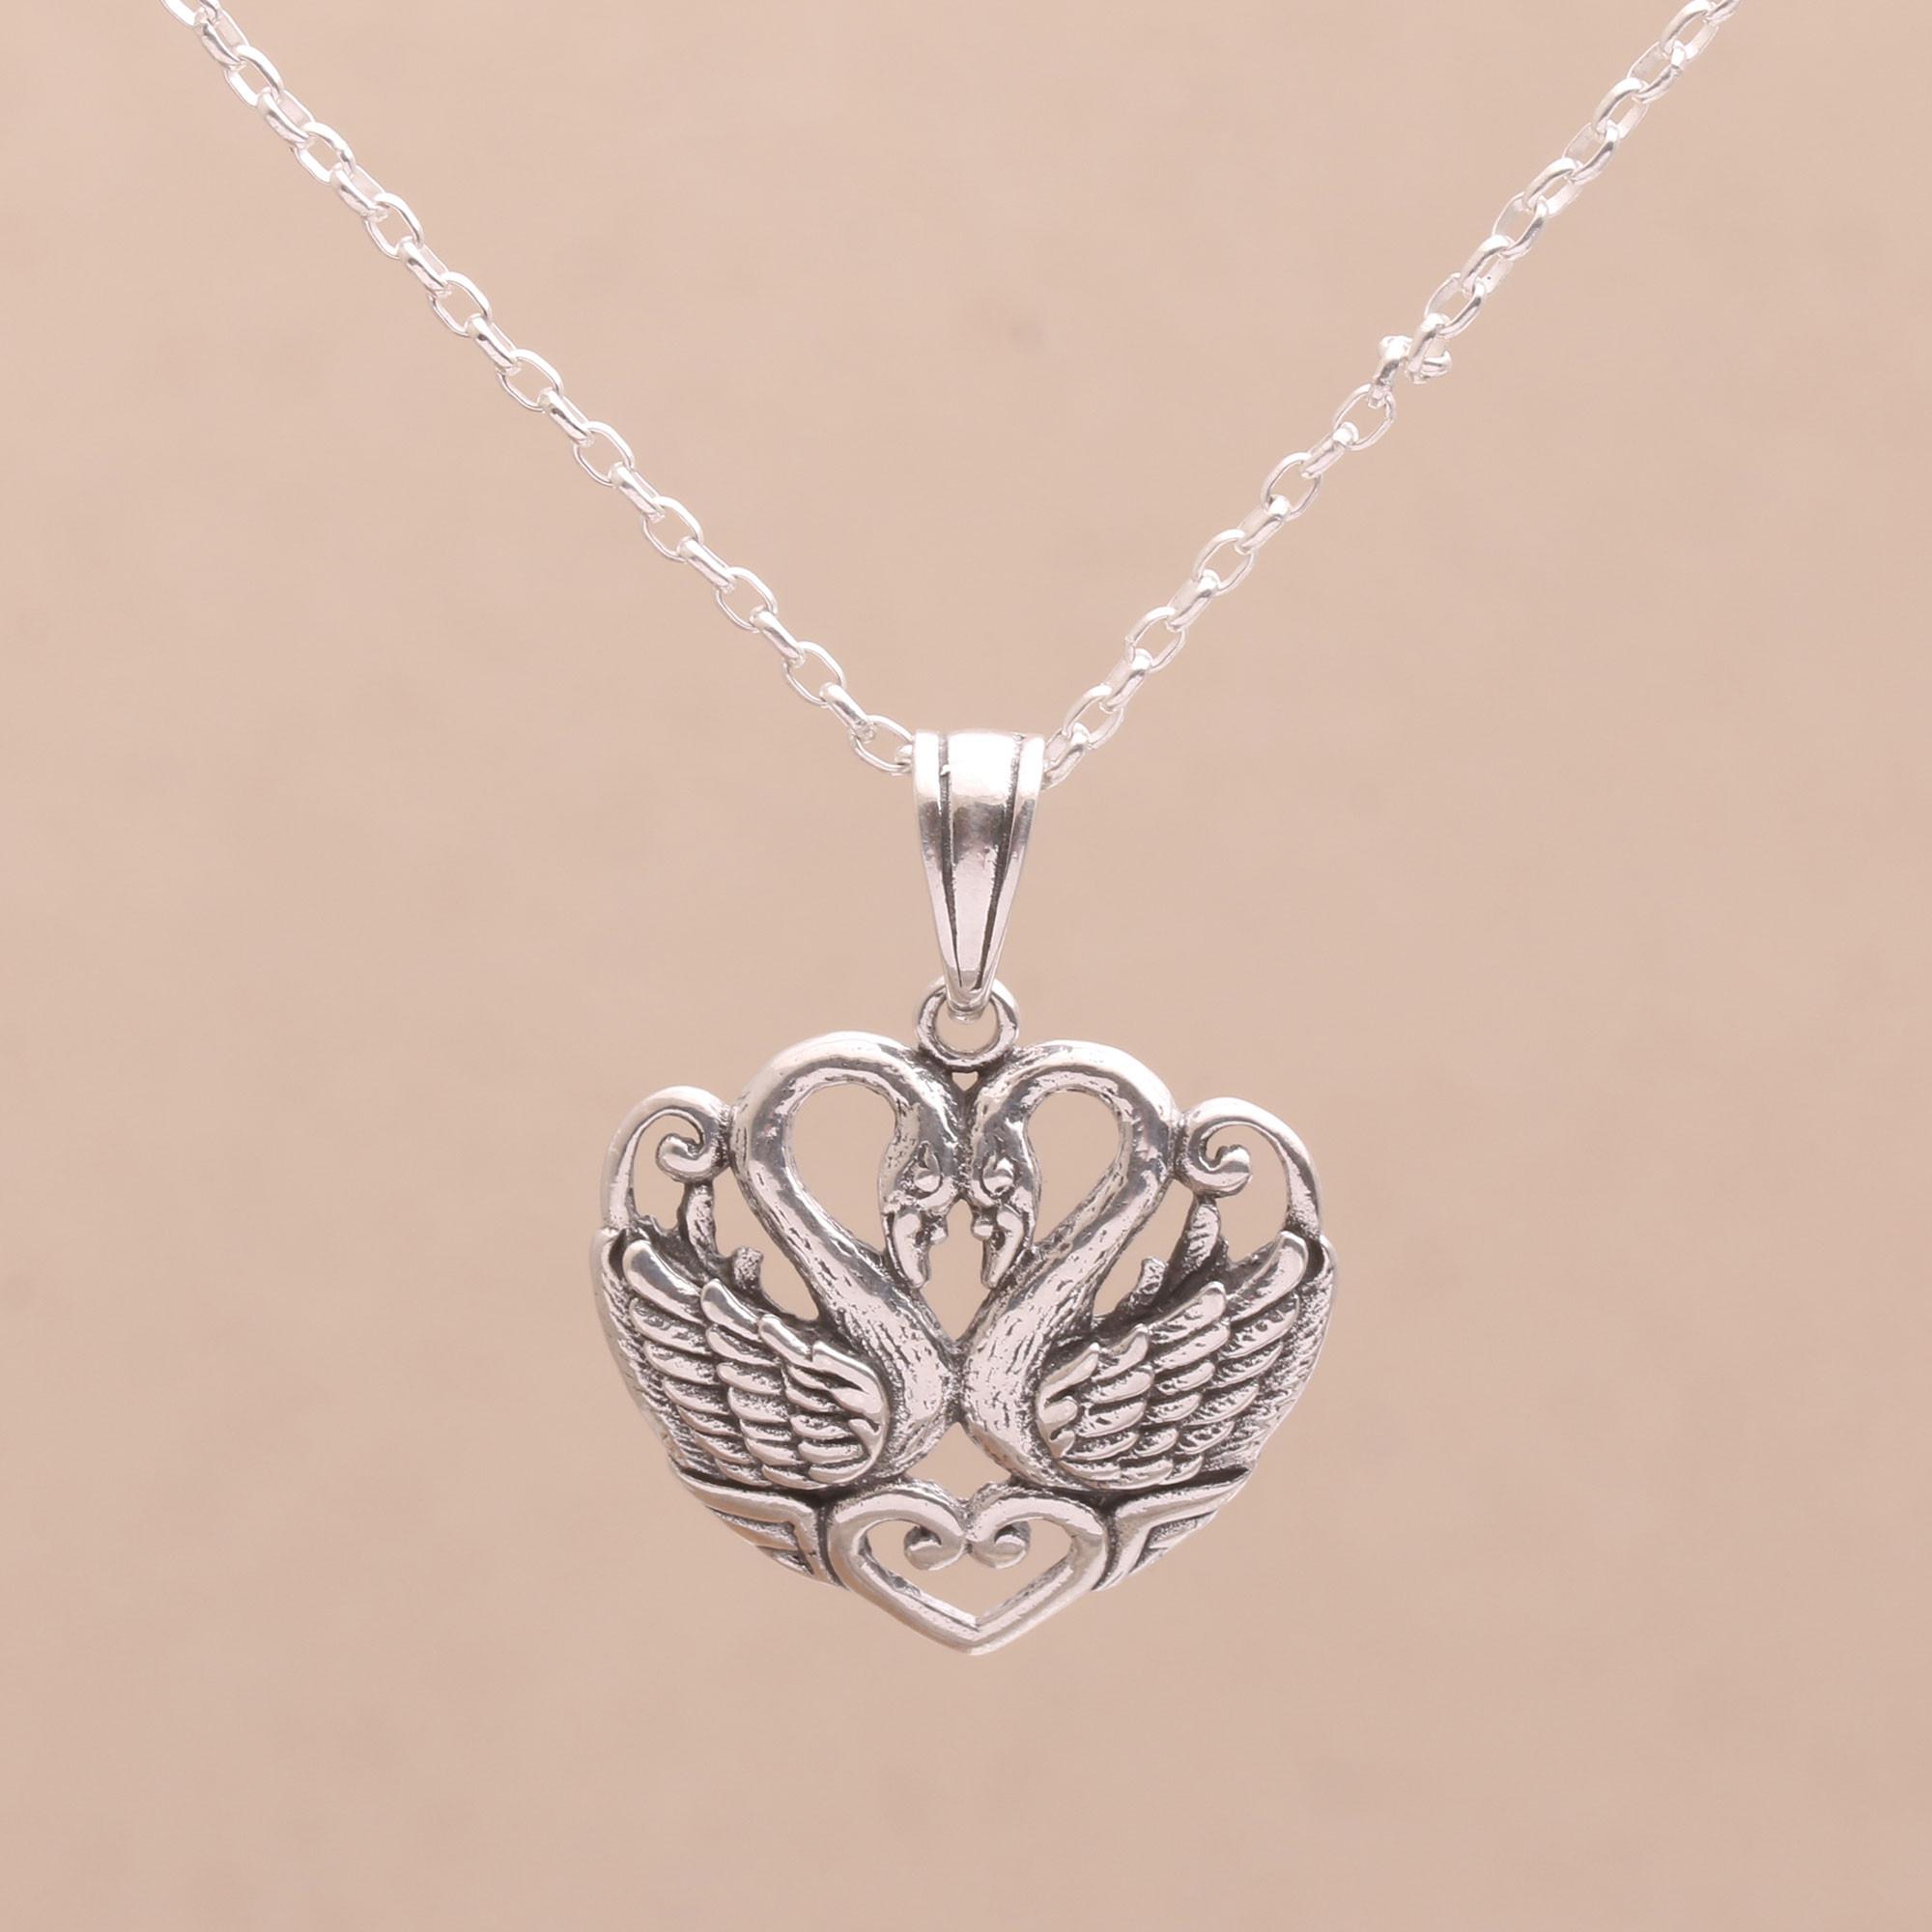 Lovely Ortak /'Nature in Flight/' Sterling Silver Swan Pendant and Chain